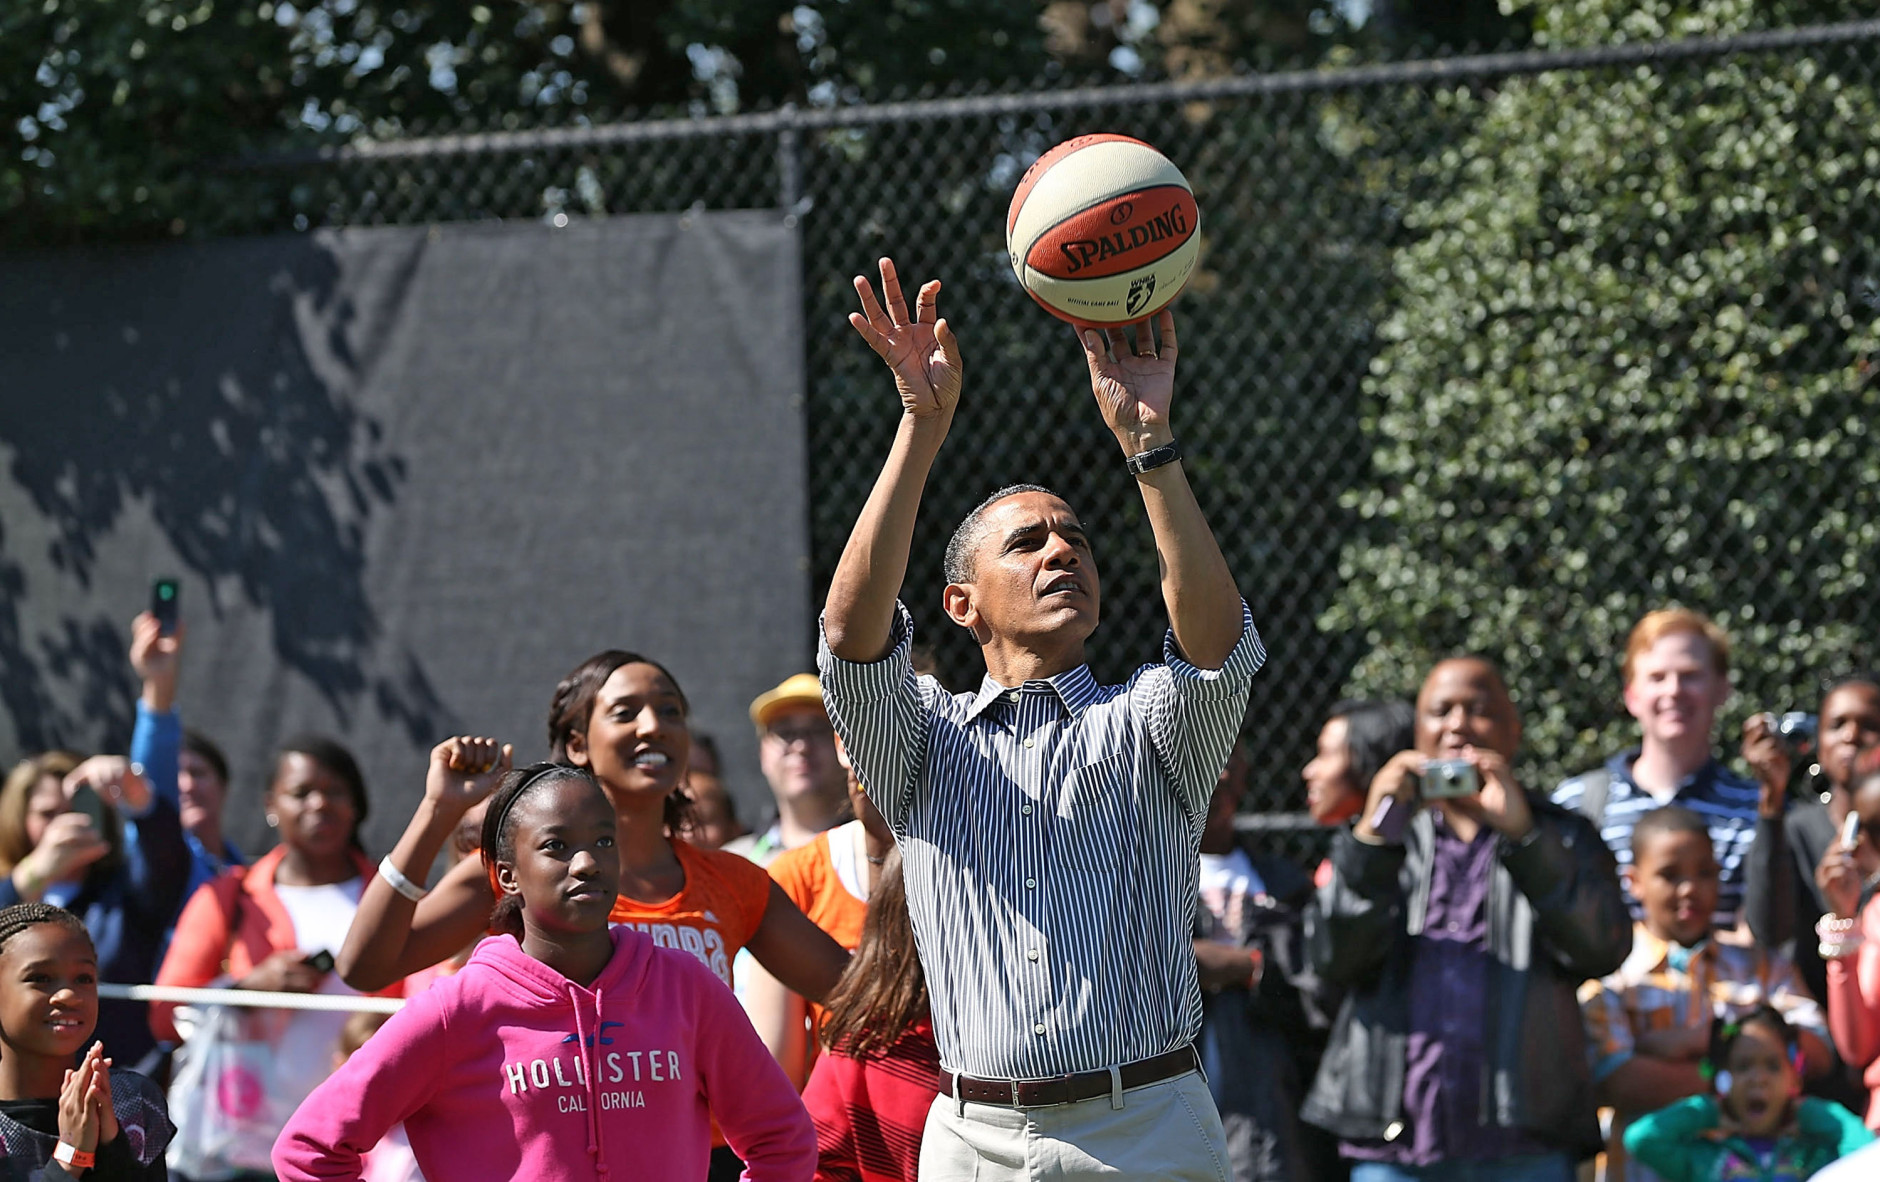 WASHINGTON, DC - APRIL 01:  U.S. President Barack Obama plays basketball with children during the annual Easter Egg Roll on the White House tennis court April 1, 2013 in Washington, DC. Thousands of people are expected to attend the 134-year-old tradition of rolling colored eggs down the White House lawn that was started by President Rutherford B. Hayes in 1878.  (Photo by Mark Wilson/Getty Images)